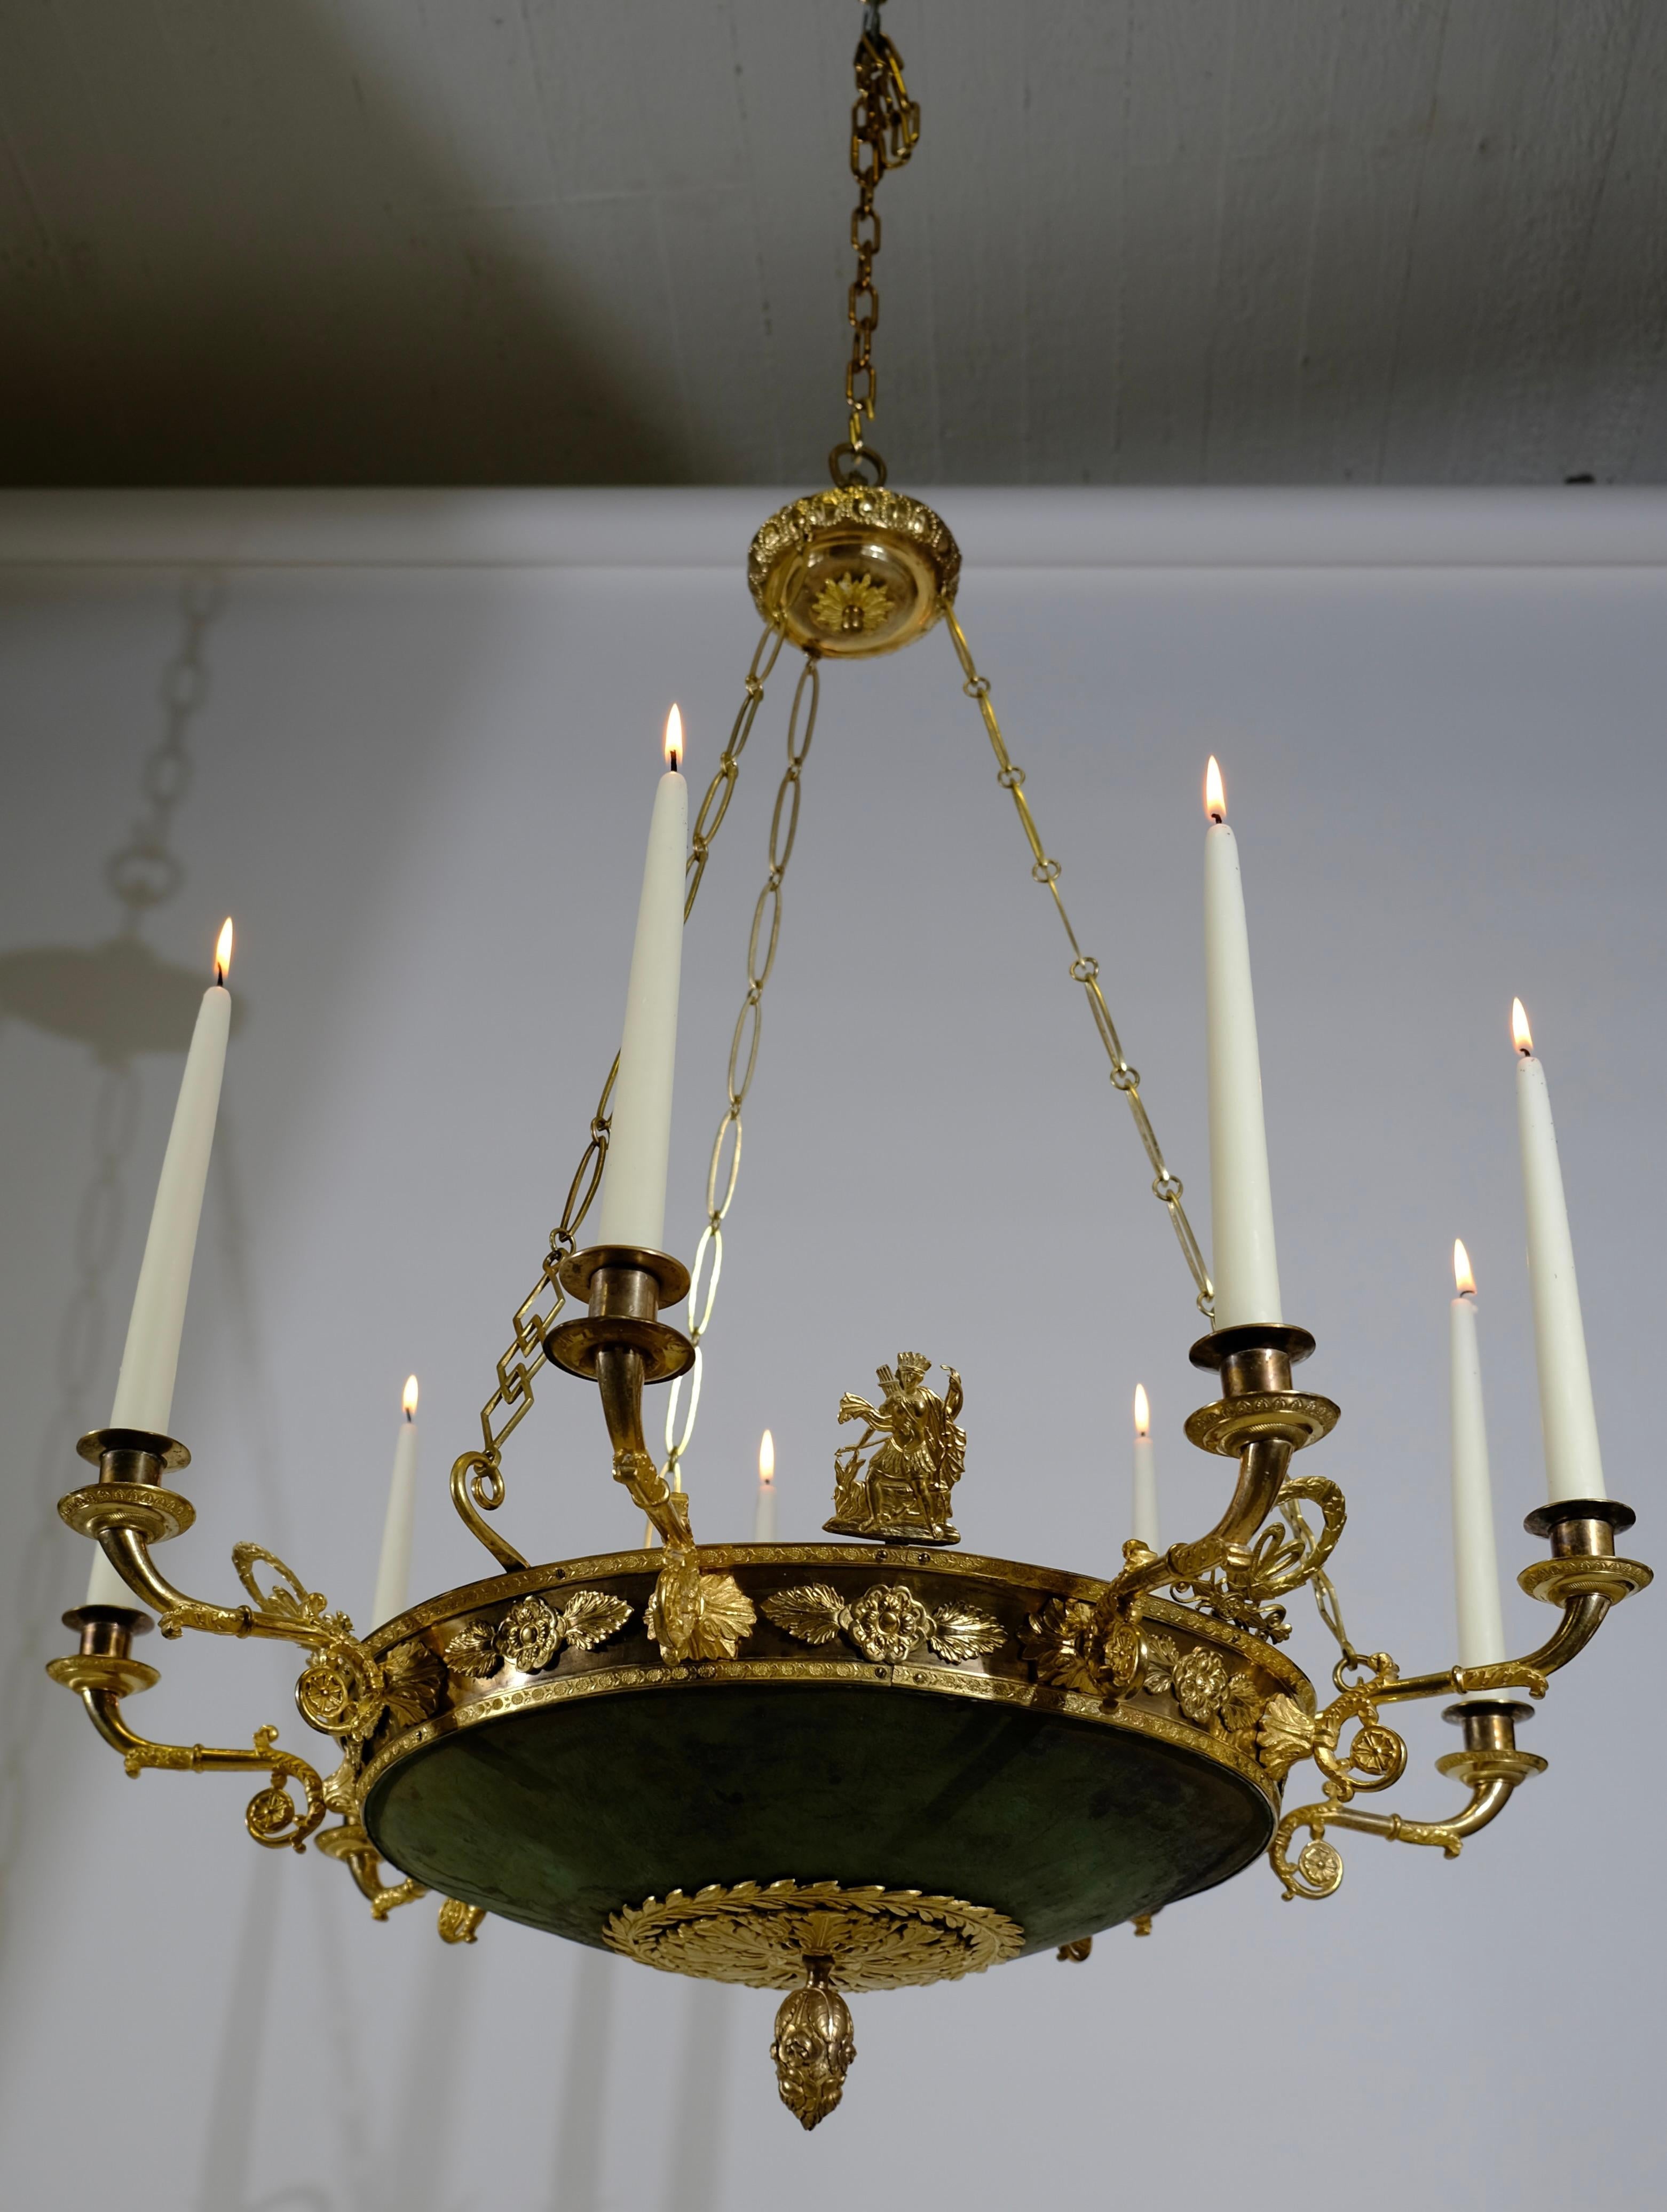 Patinated Antique Empire 9 Light Chandelier, Made circa 1820 For Sale